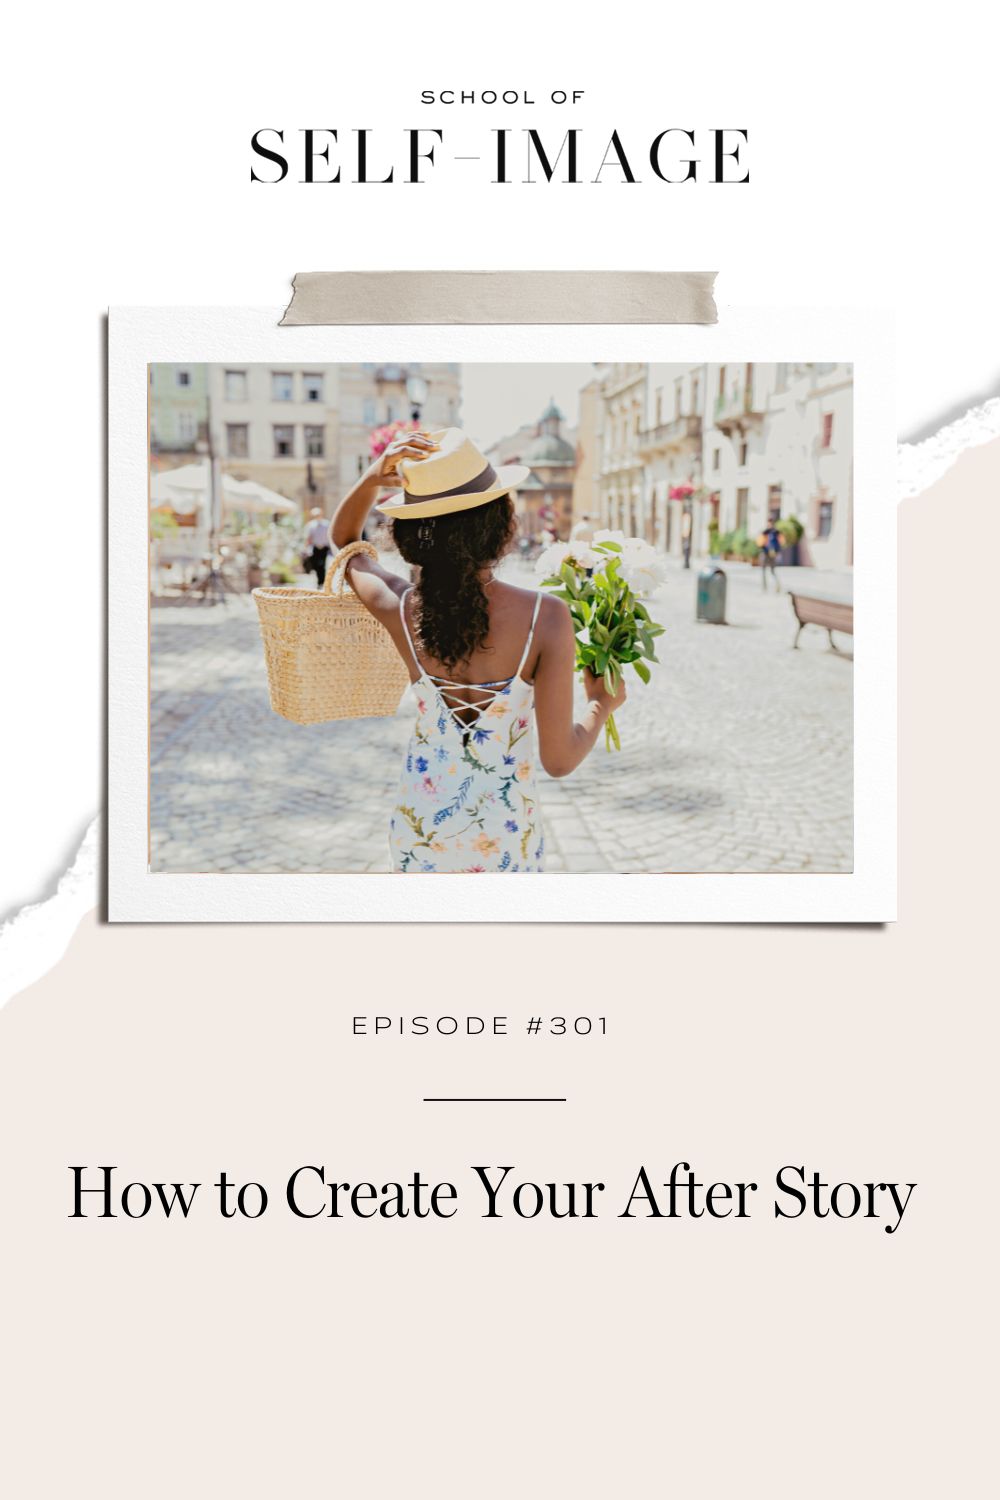 How to create your own after story and stop focusing on your before story and everything that’s wrong.